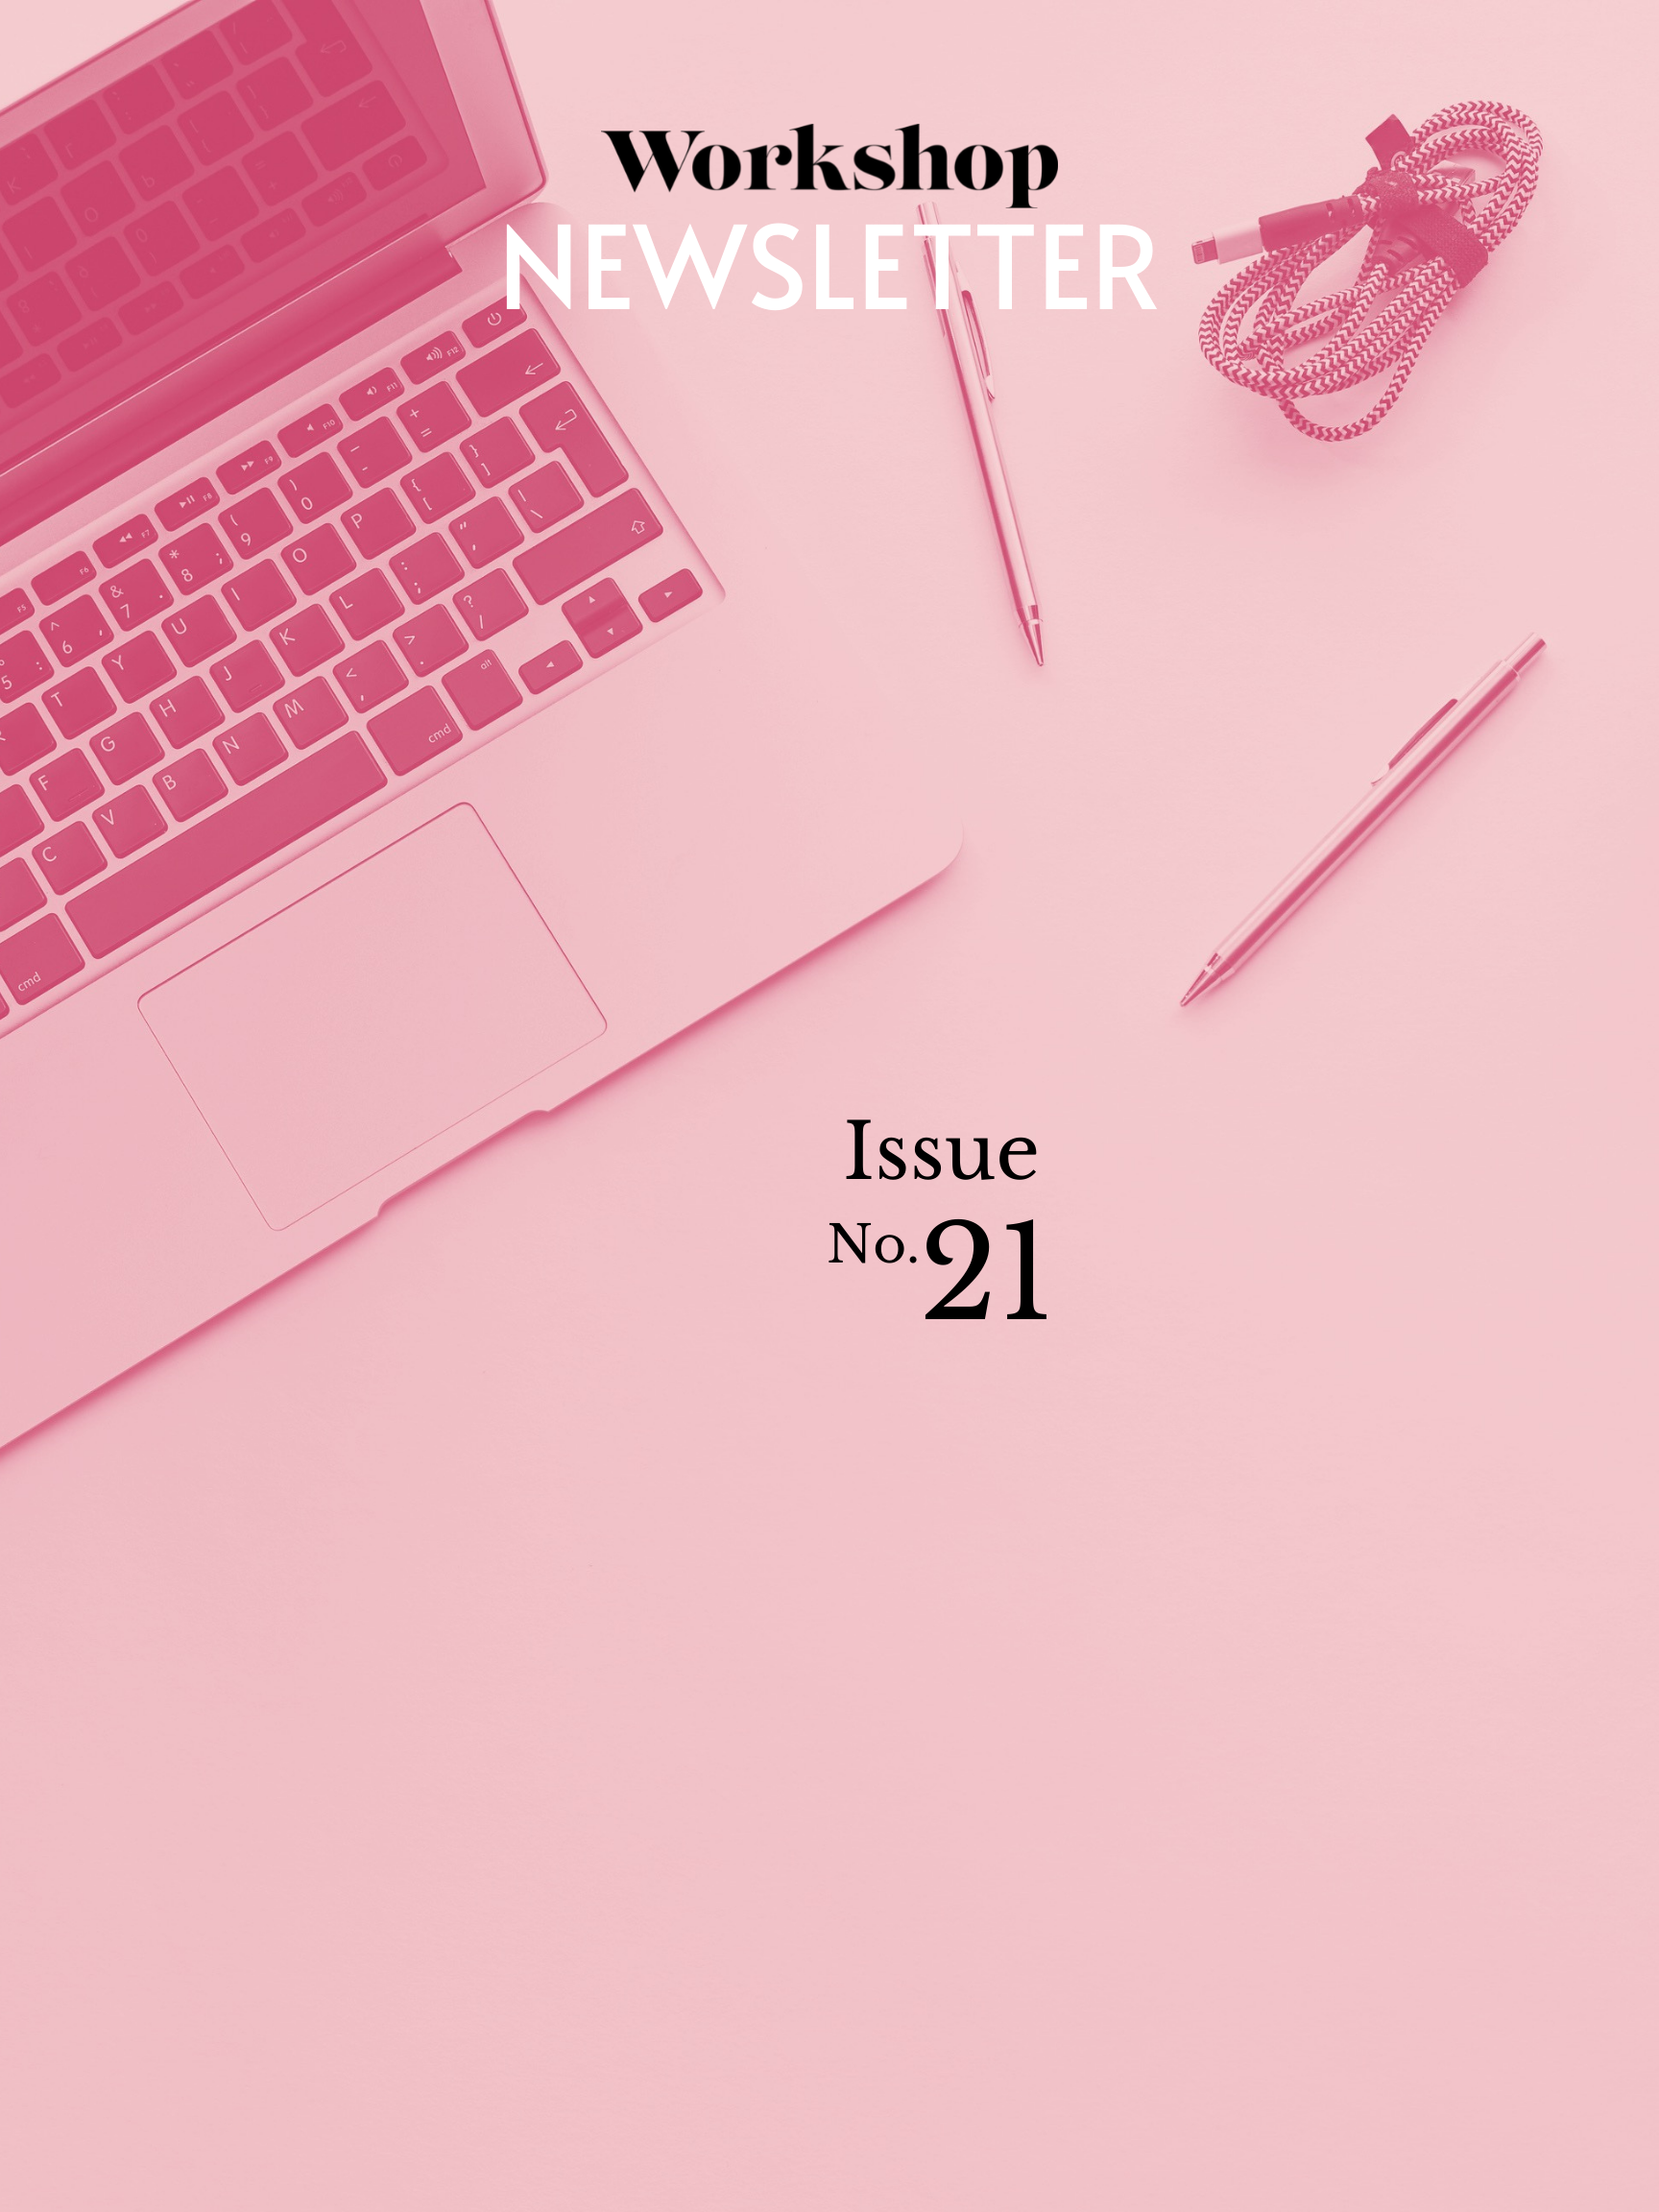 Workshop Newsletter: Issue No. 21 on a pink background with a laptop, charging cable and pens